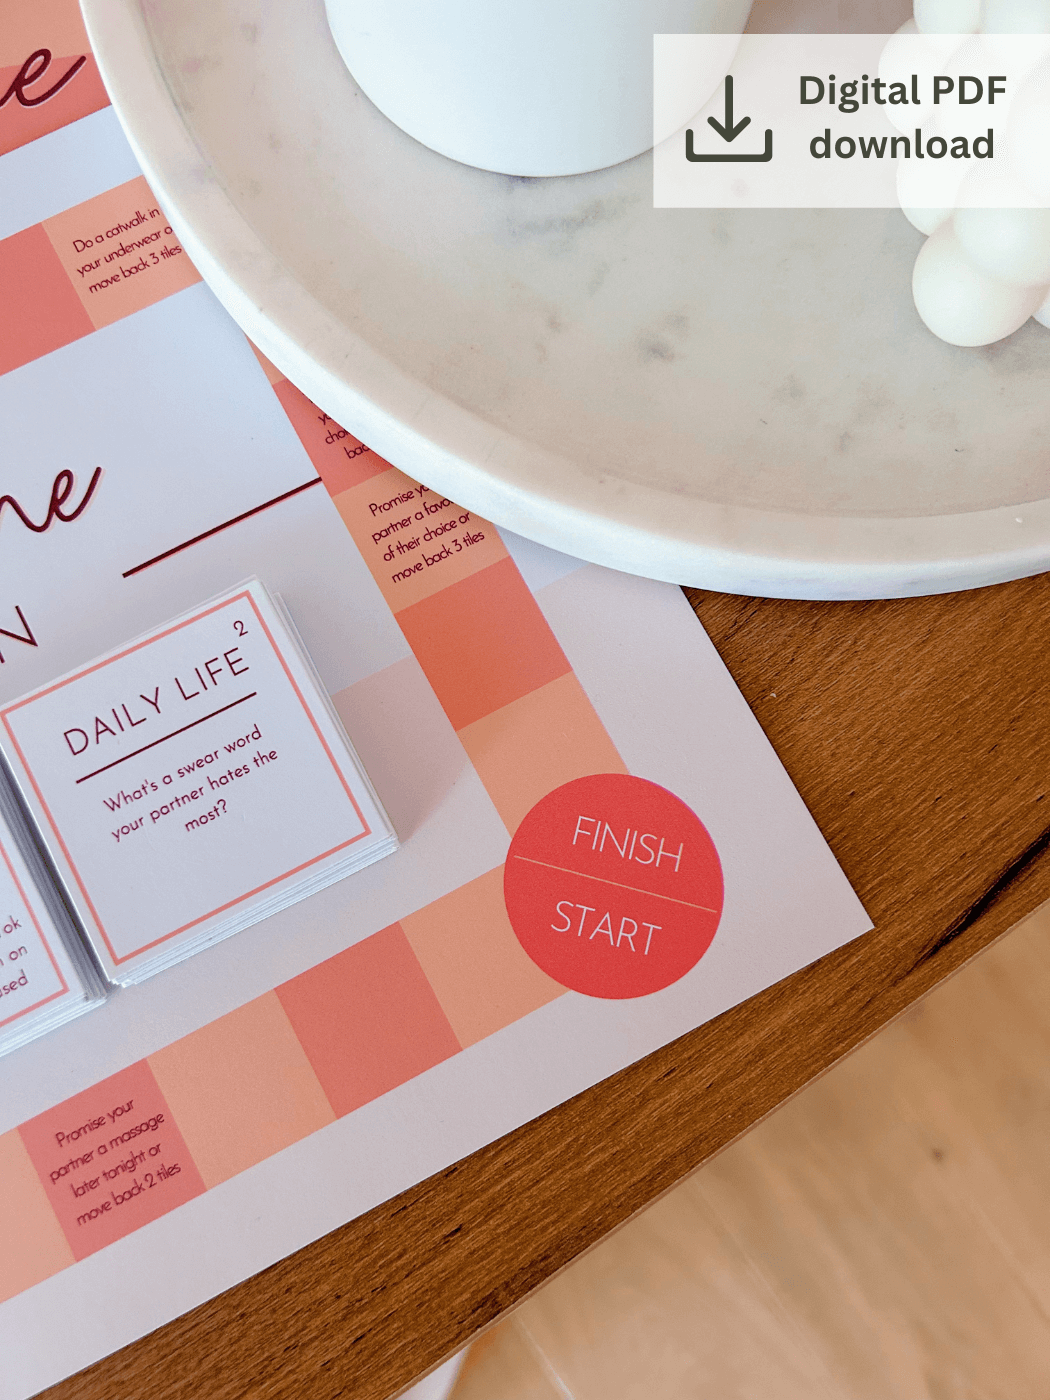 'Match Me If You Can' Printable Date Night Game